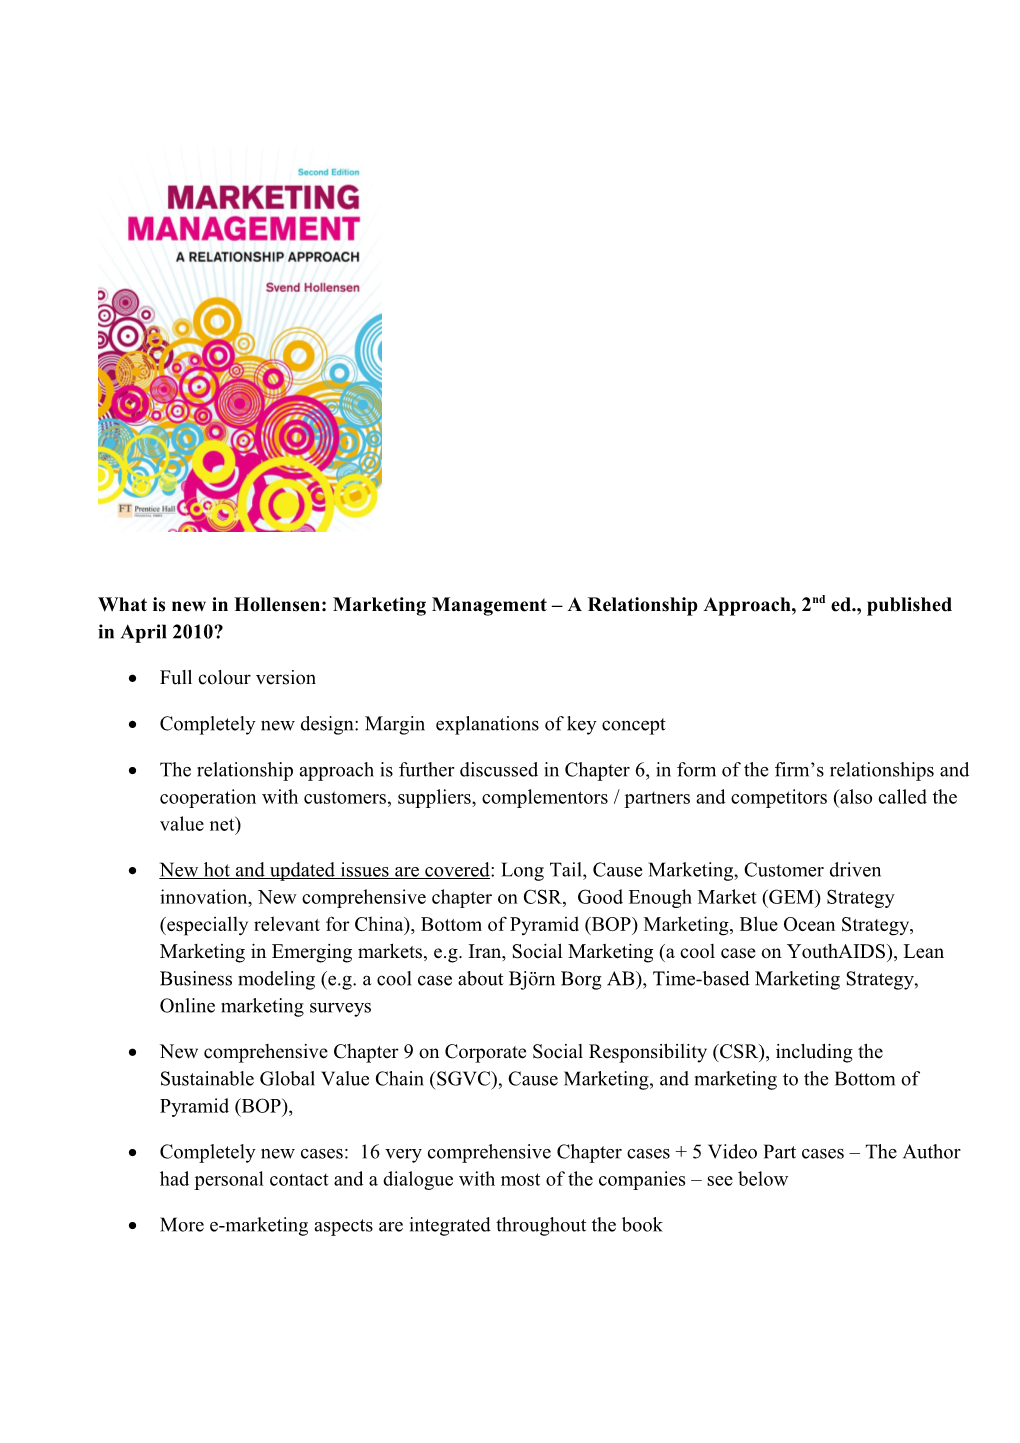 What Is New in Hollensen: Marketing Management a Relationship Approach, 2Nd Ed., Published